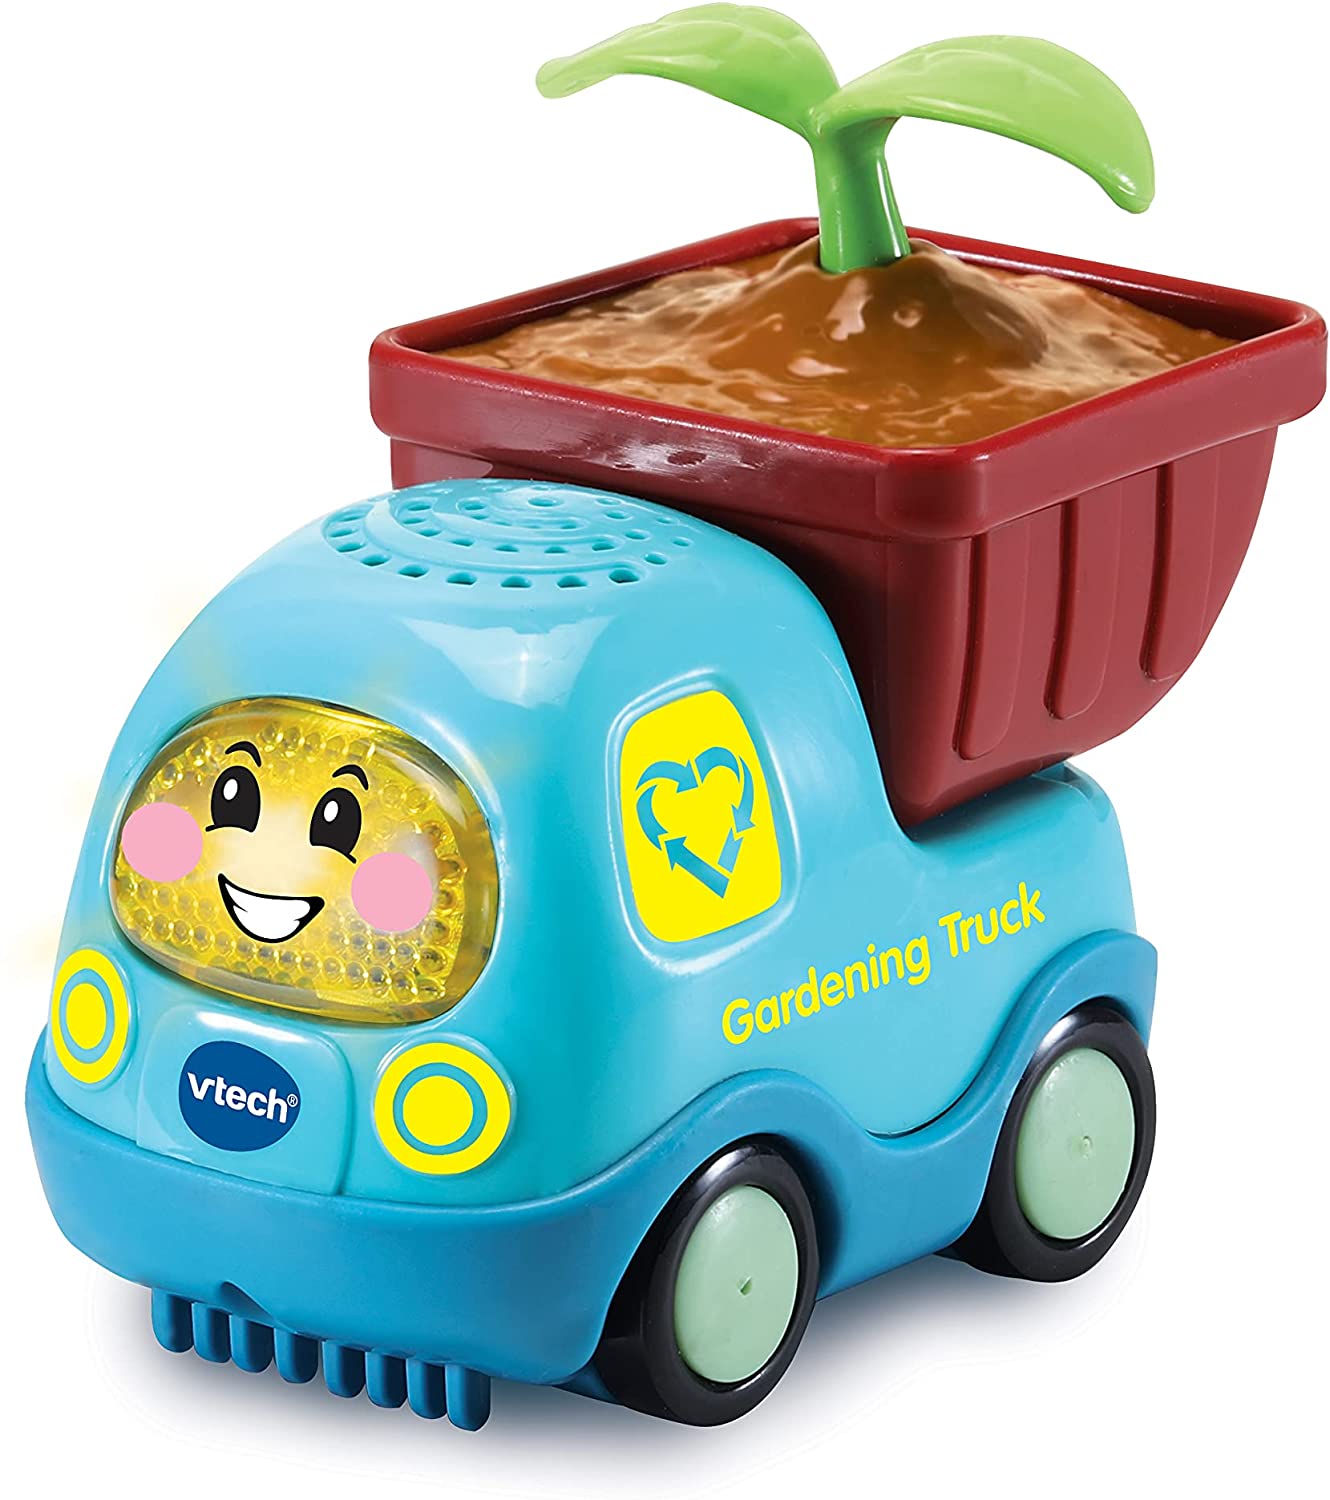 Toot-Toot Drivers Special Edition Gardening Truck